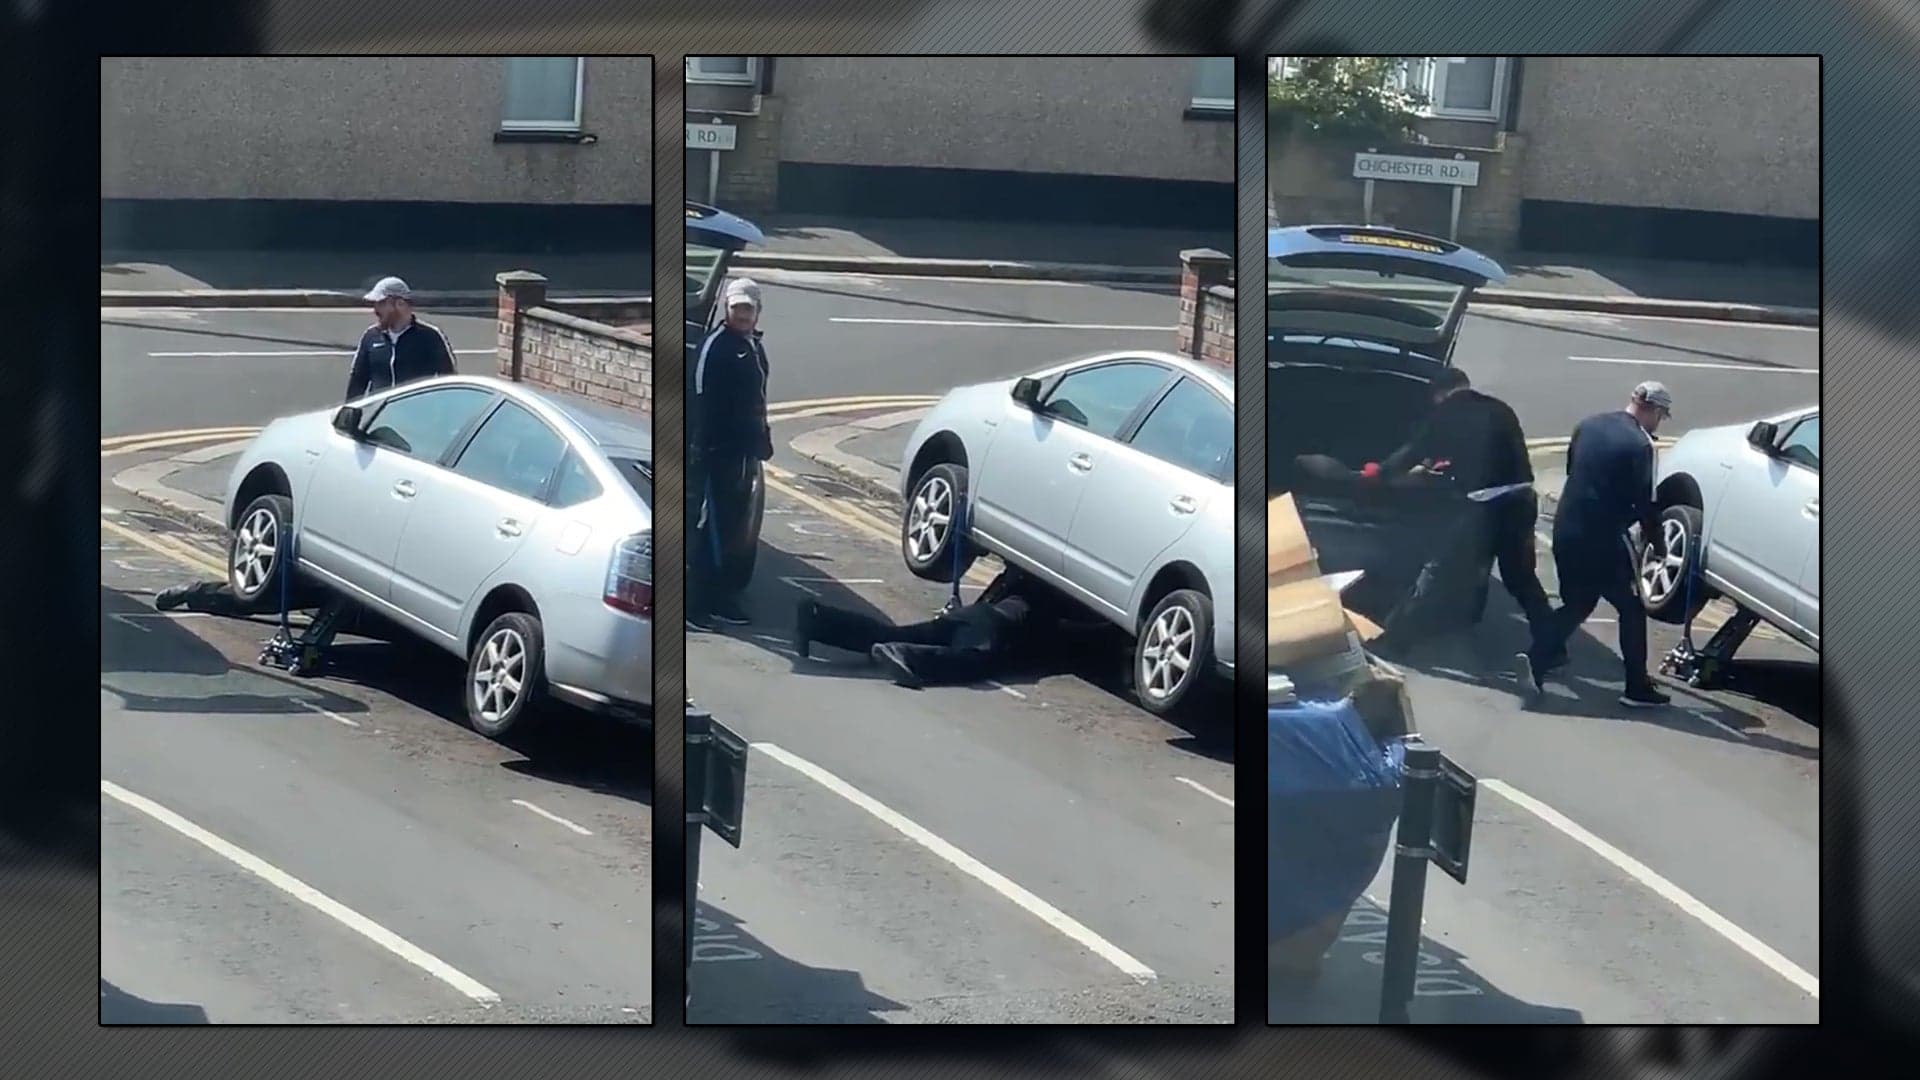 Watch These Thieves Steal a Catalytic Converter From a Toyota Prius in Broad Daylight